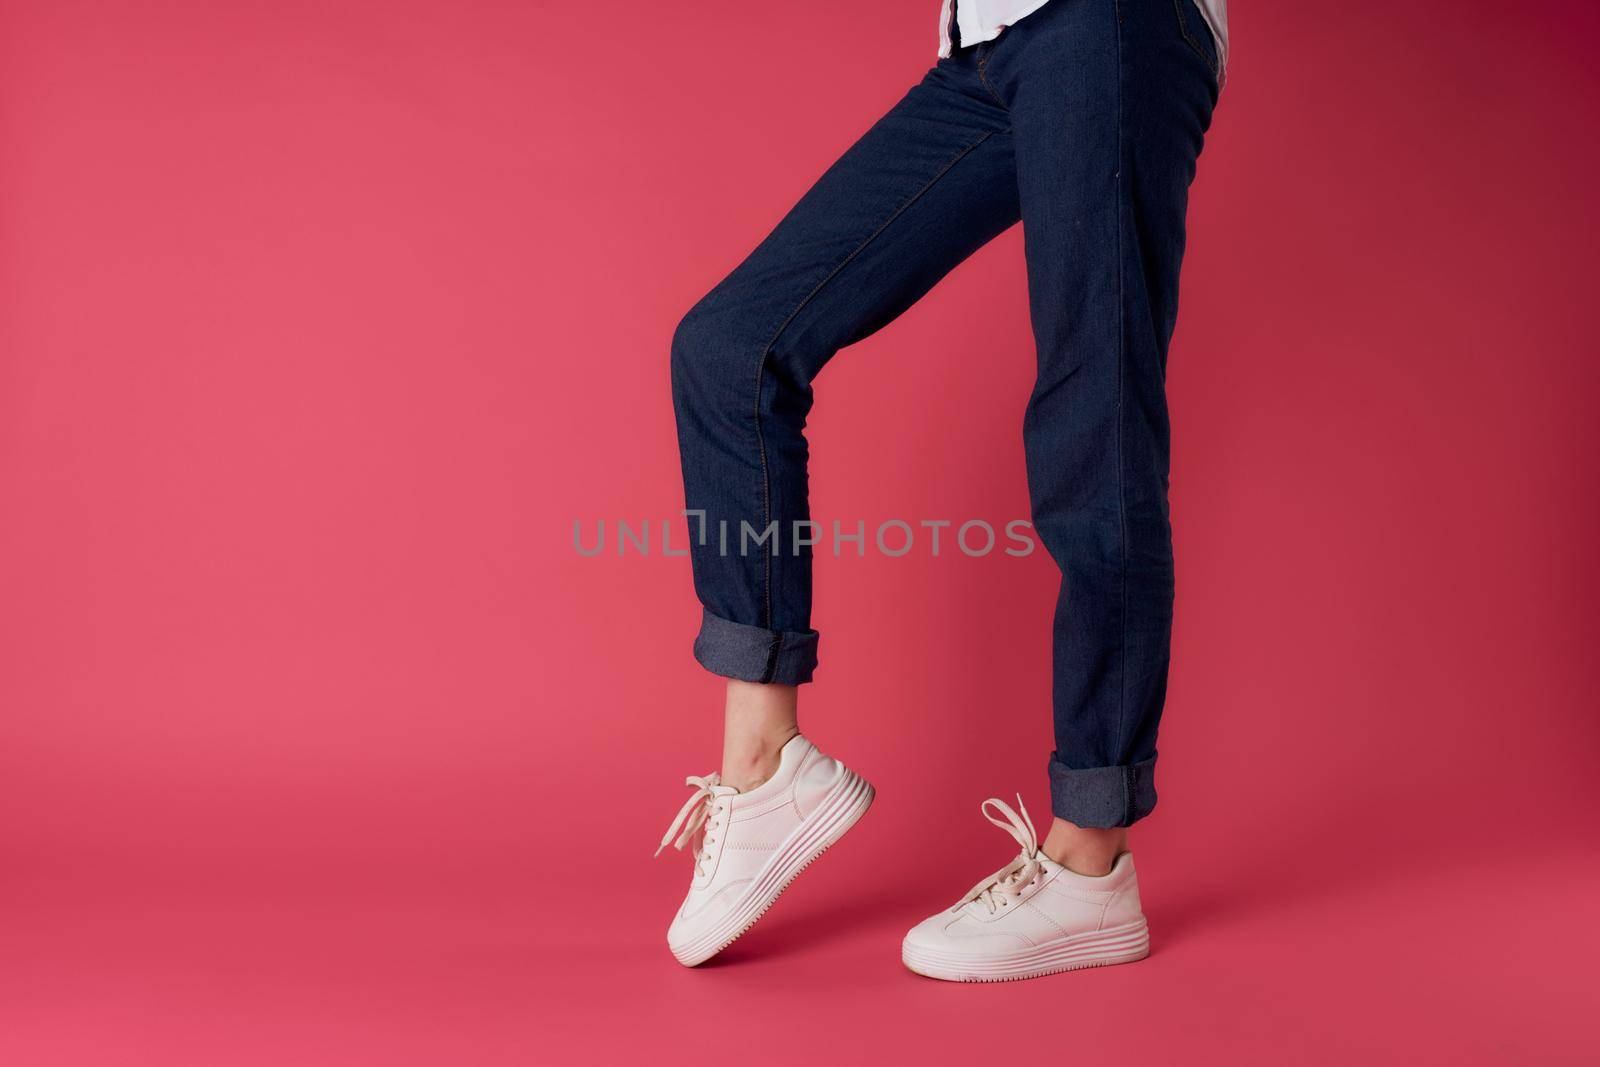 Womens feet white sneakers fashion street style pink background by SHOTPRIME